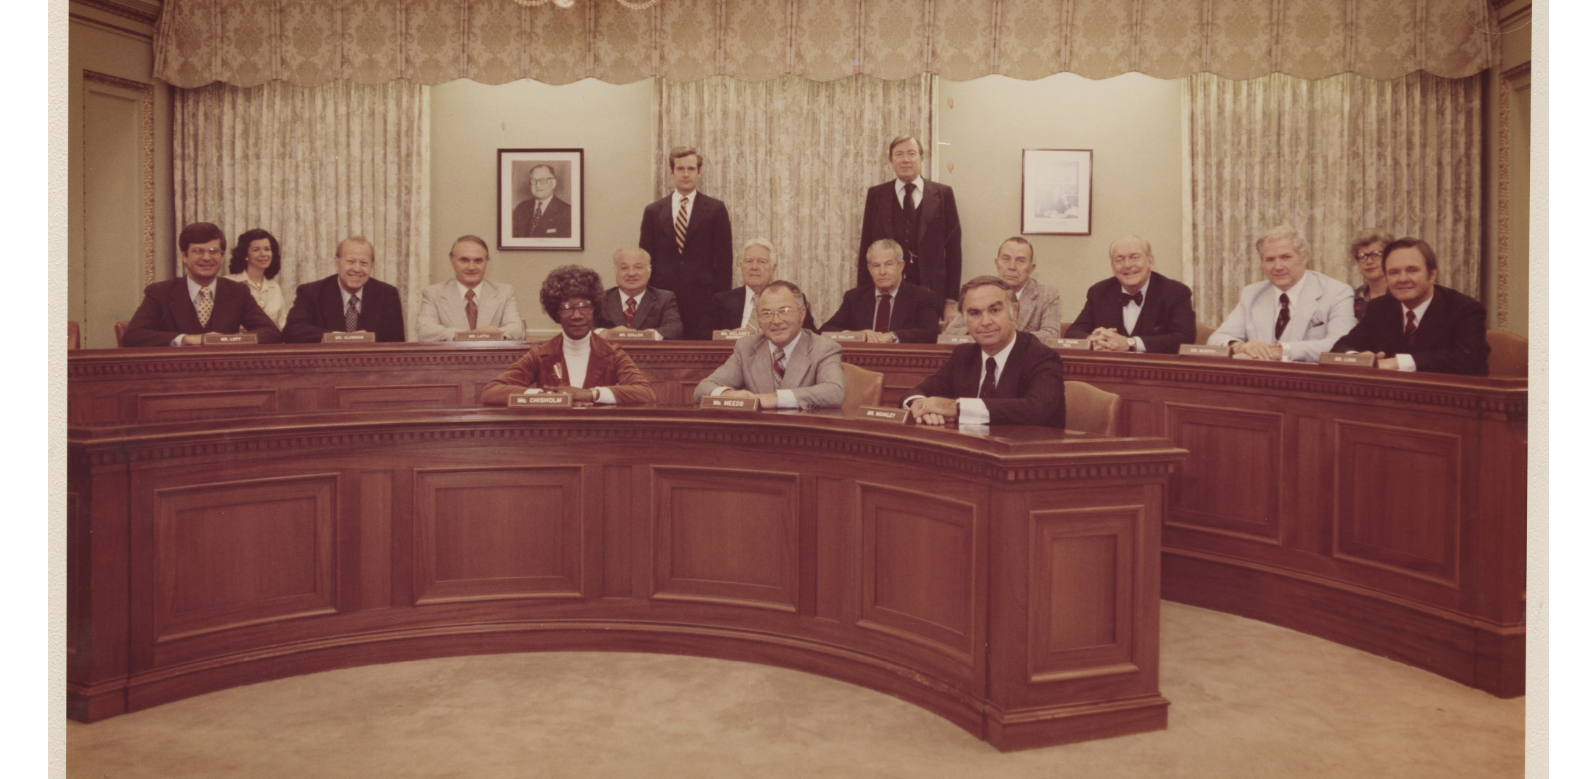 Photograph of the Rules Committee, 95th Congress, ca. 1977